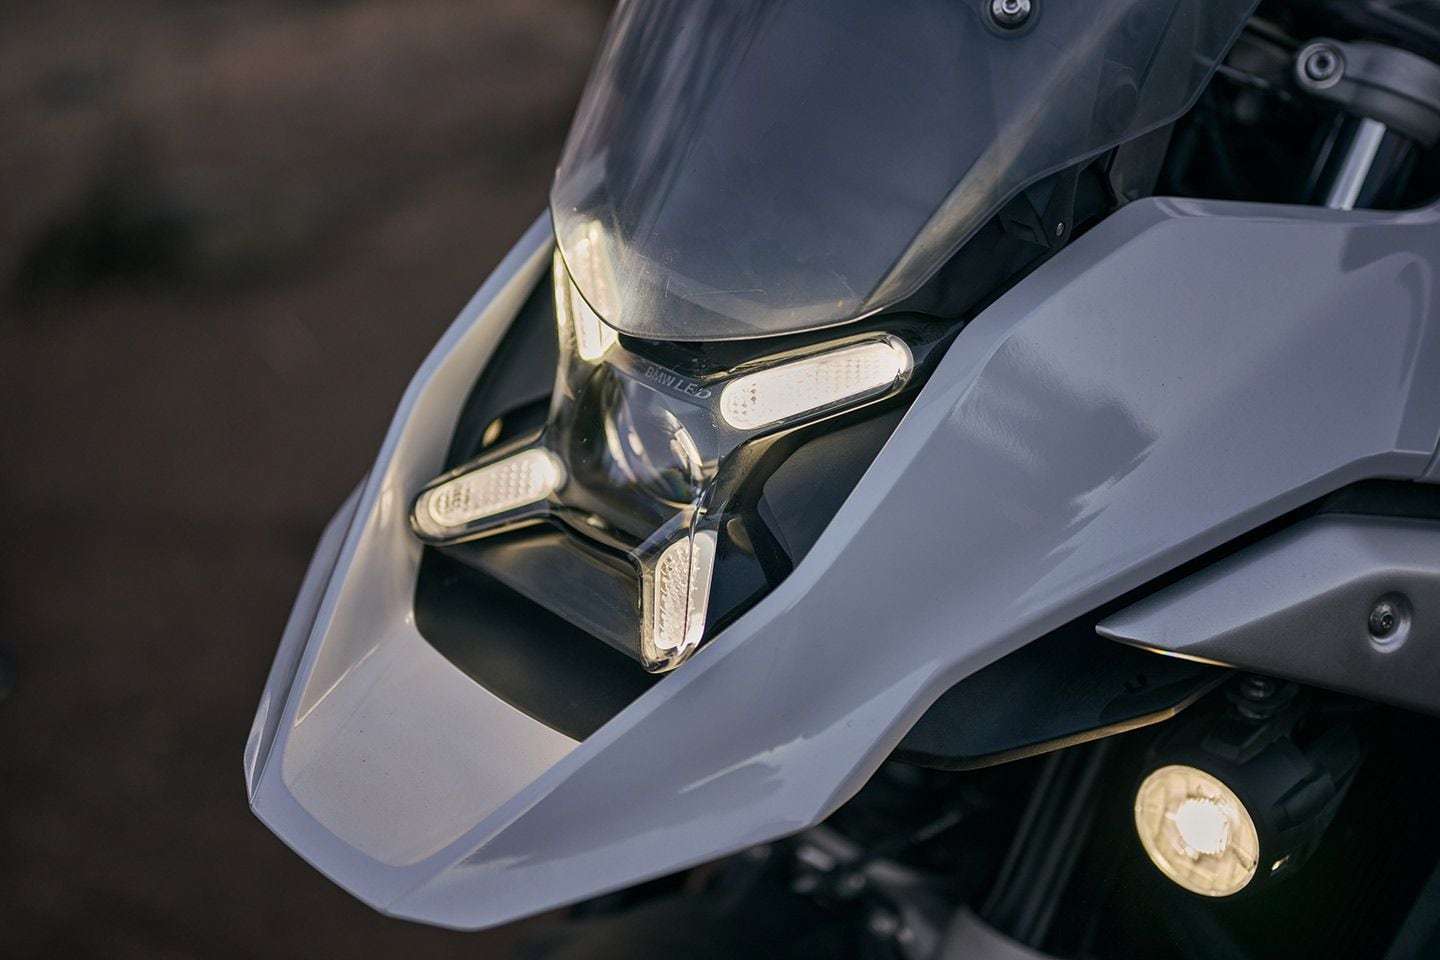 BMW’s R 1300 GS gets a new LED headlight that integrates the high and low beams into a single unit.